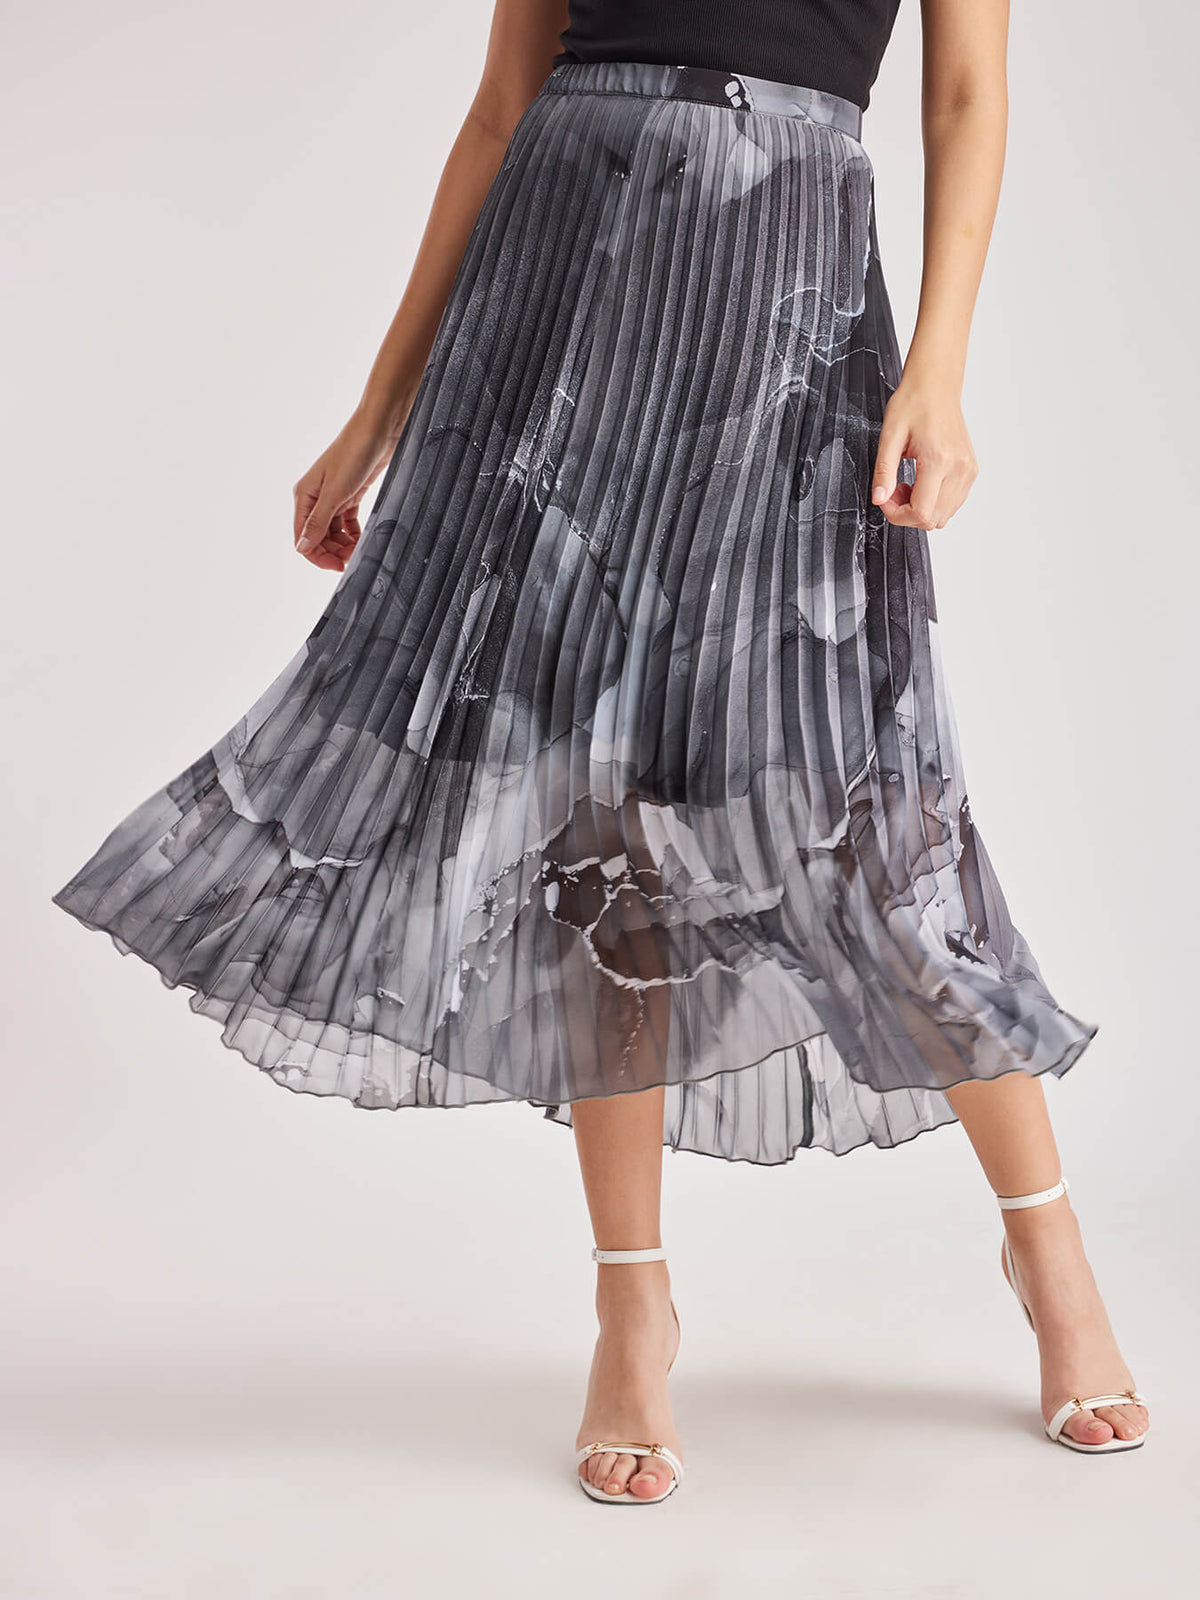 Marble Print Pleated Skirt - Black And White